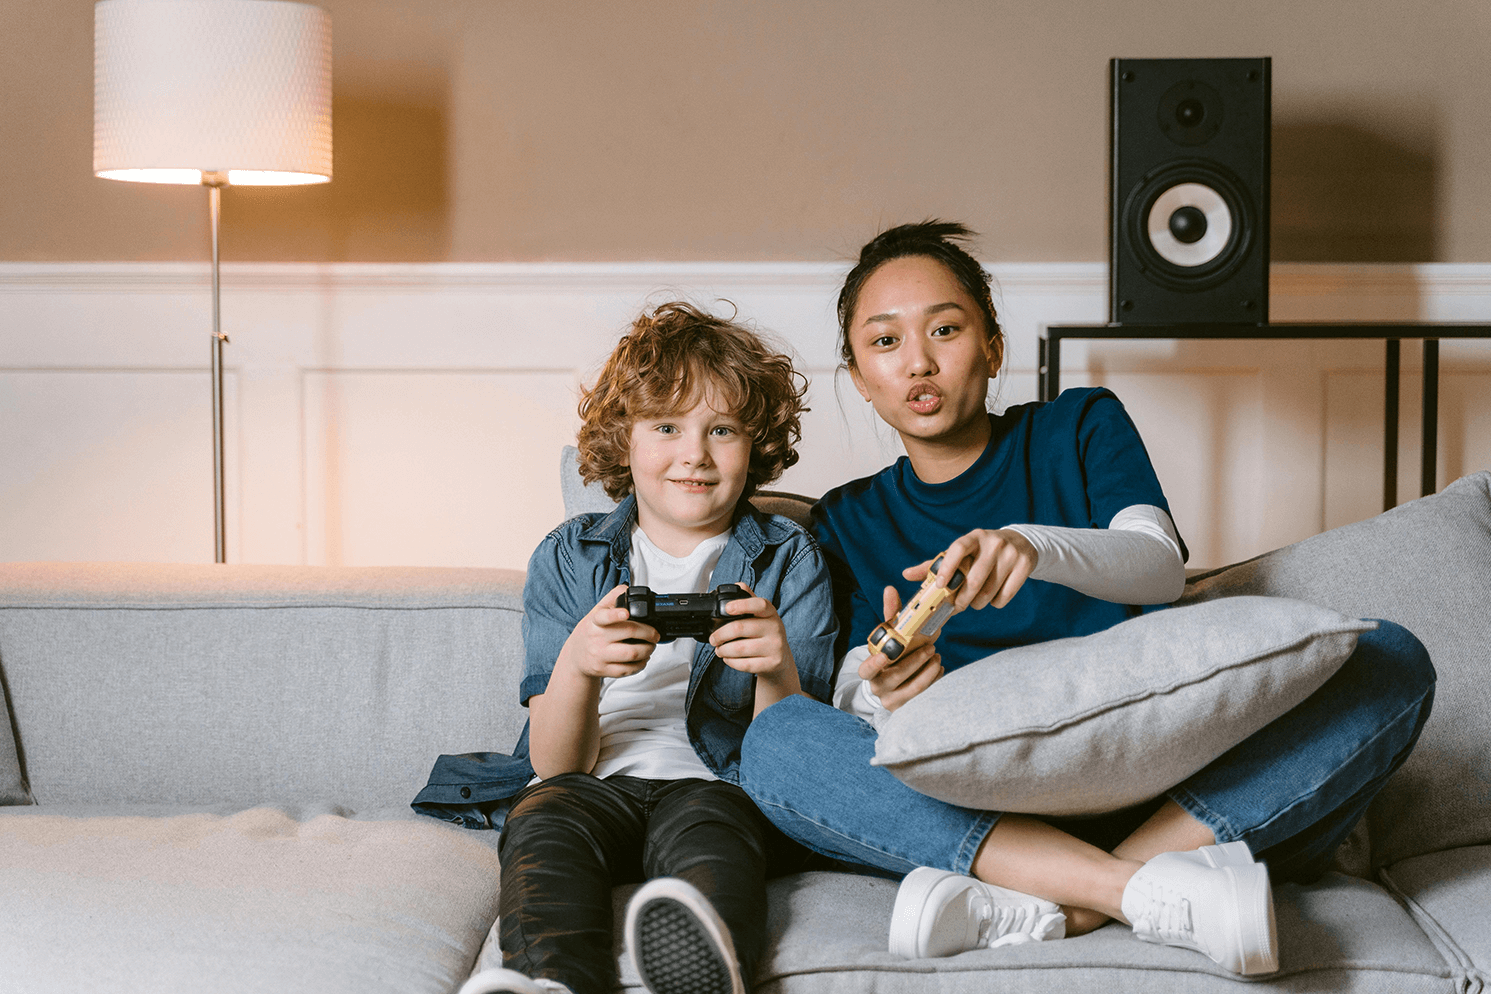 A woman and boy playing video games together.